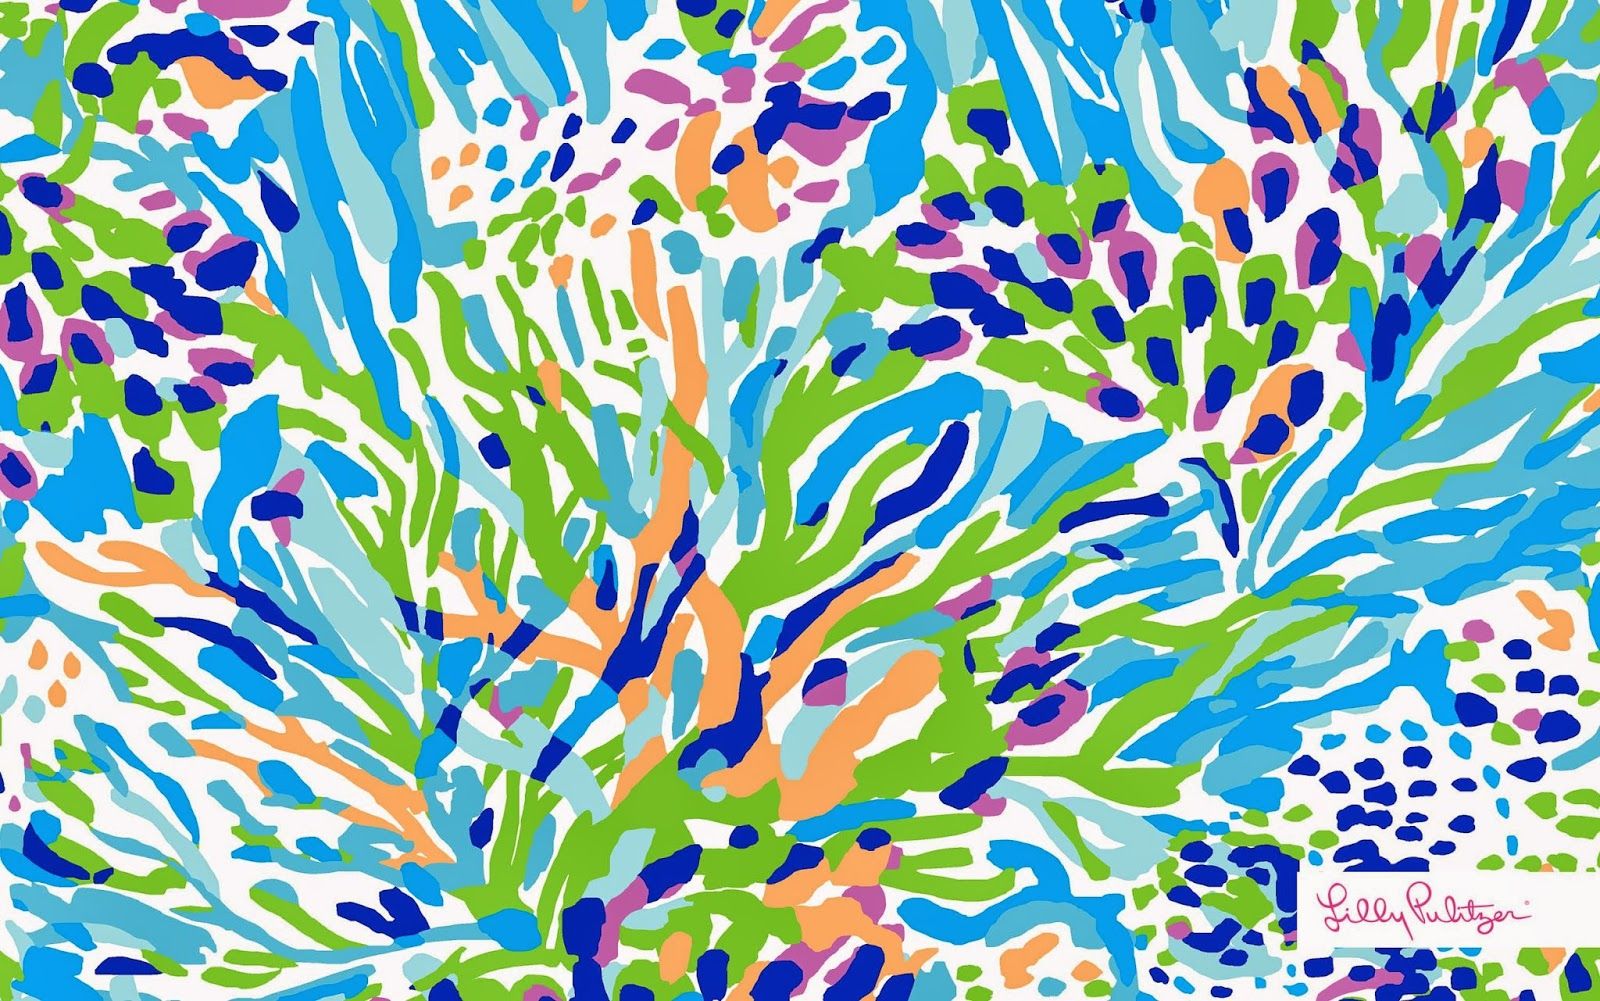 Lilly Pulitzer Patterns For Your Desktop Wallpapers